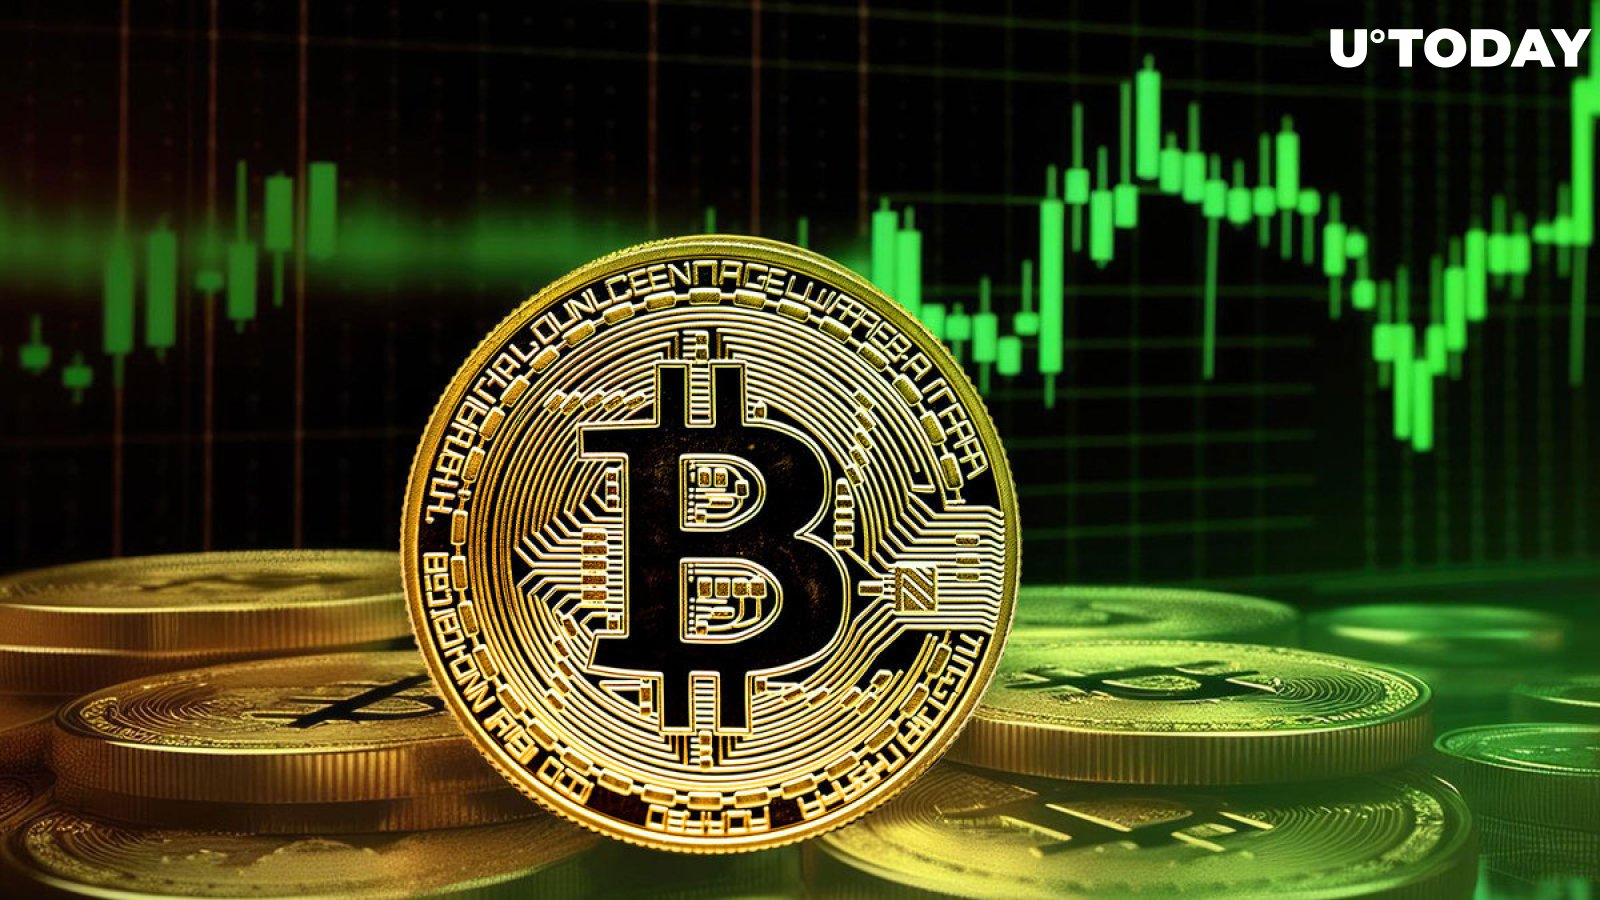 Bitcoin Price Might Reach $200,000 Before Halving, Trader Predicts